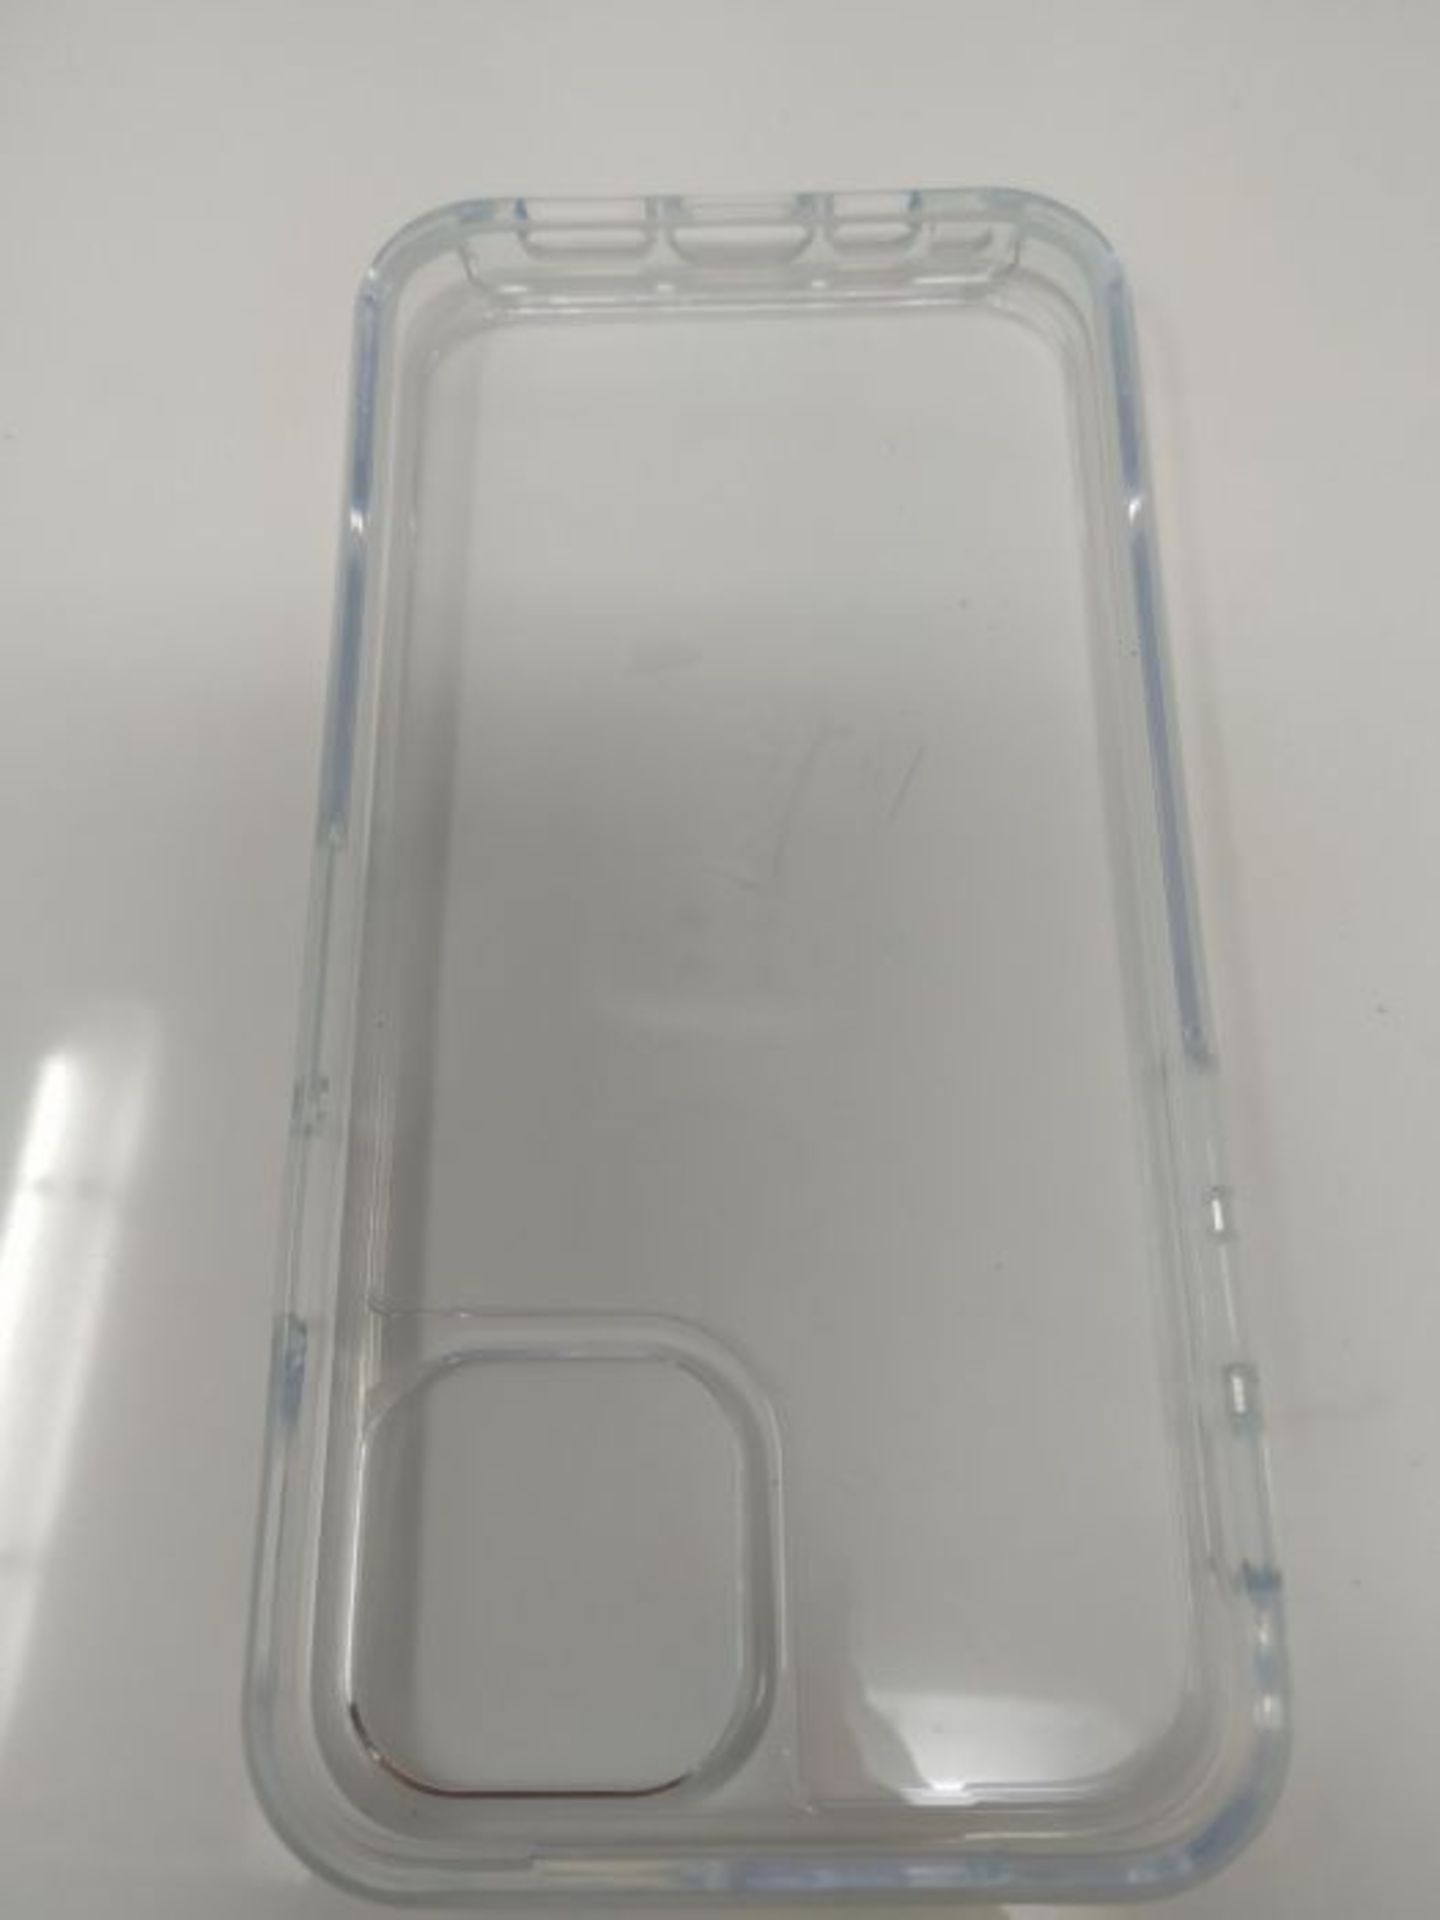 OtterBox for Apple iPhone 12/iPhone 12 Pro, Sleek Drop Proof Protective Clear Case, Sy - Image 2 of 2